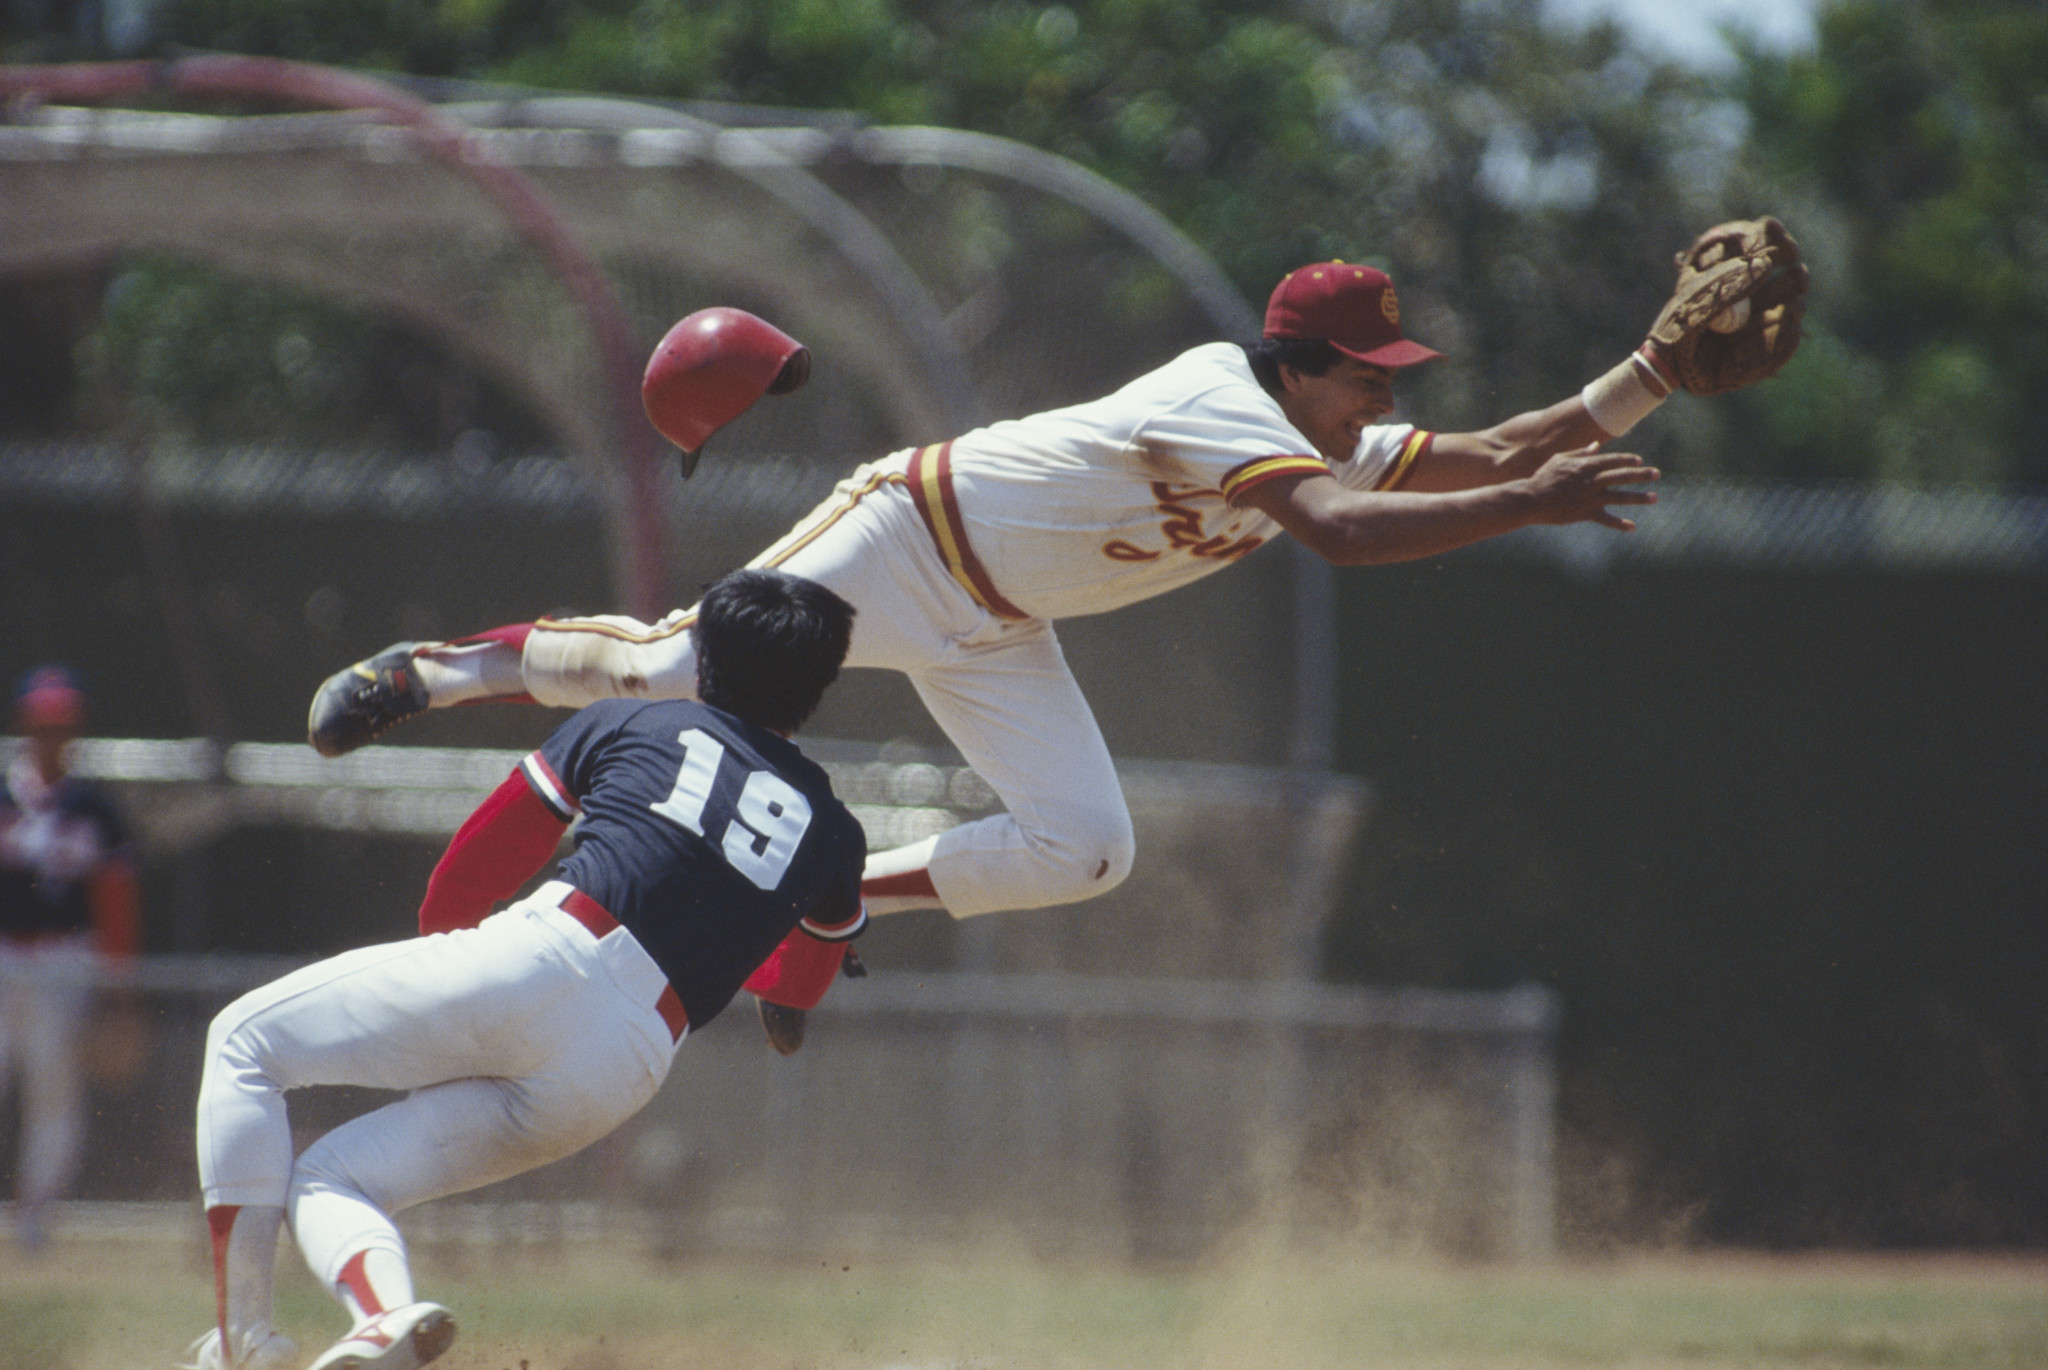 In New Delhi, it was agreed that an exhibition baseball tournament would be held during the Los Angeles 1984 Olympics ©Getty Images